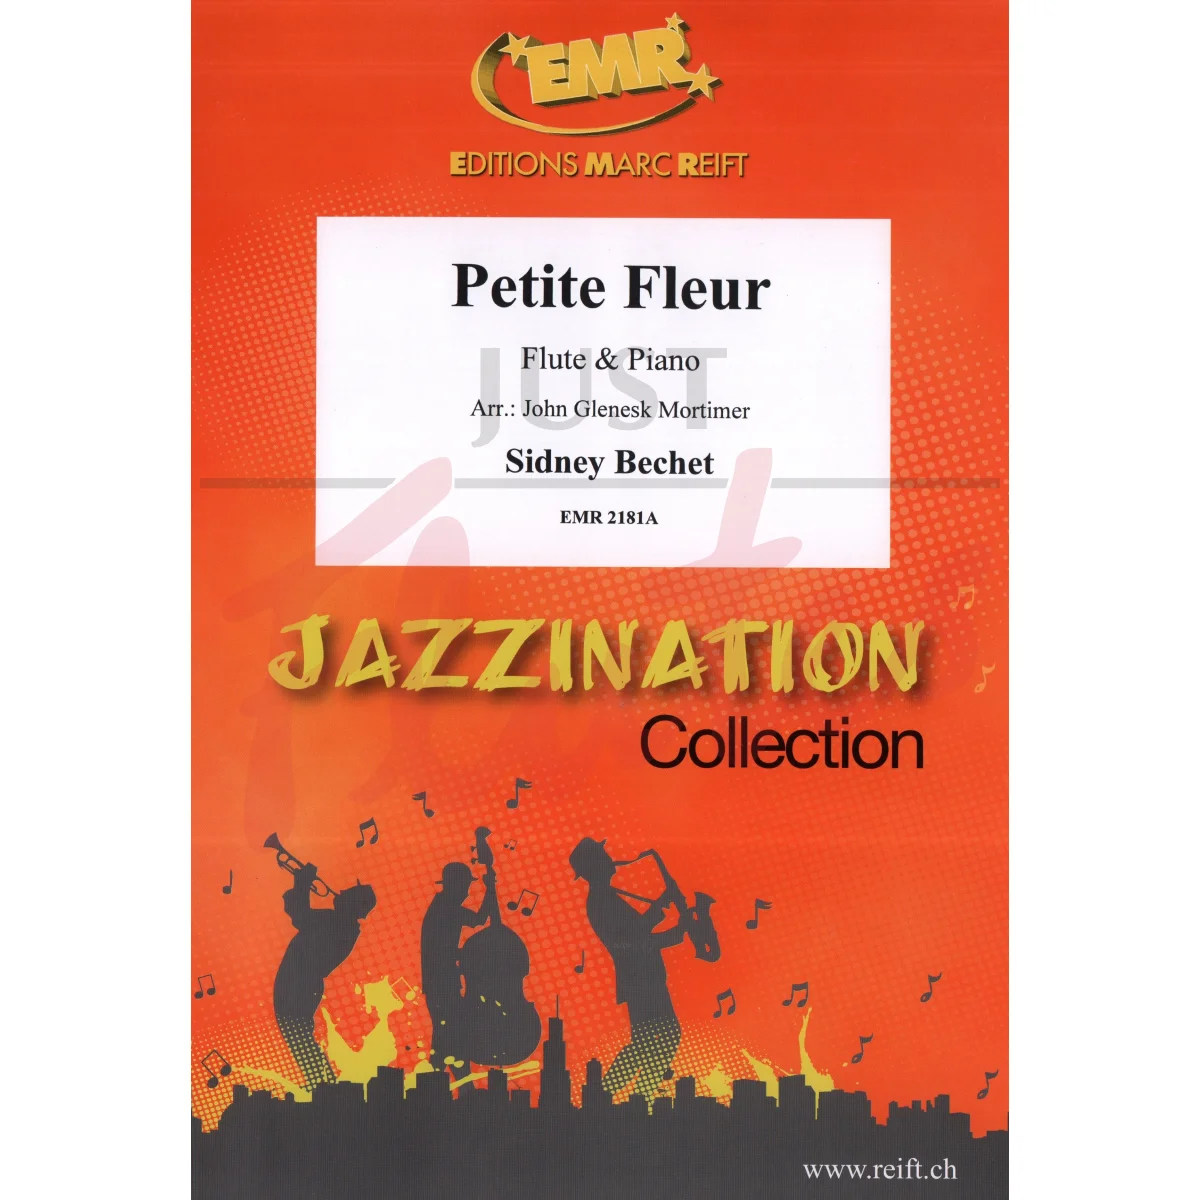 Petite Fleur for Flute and Piano